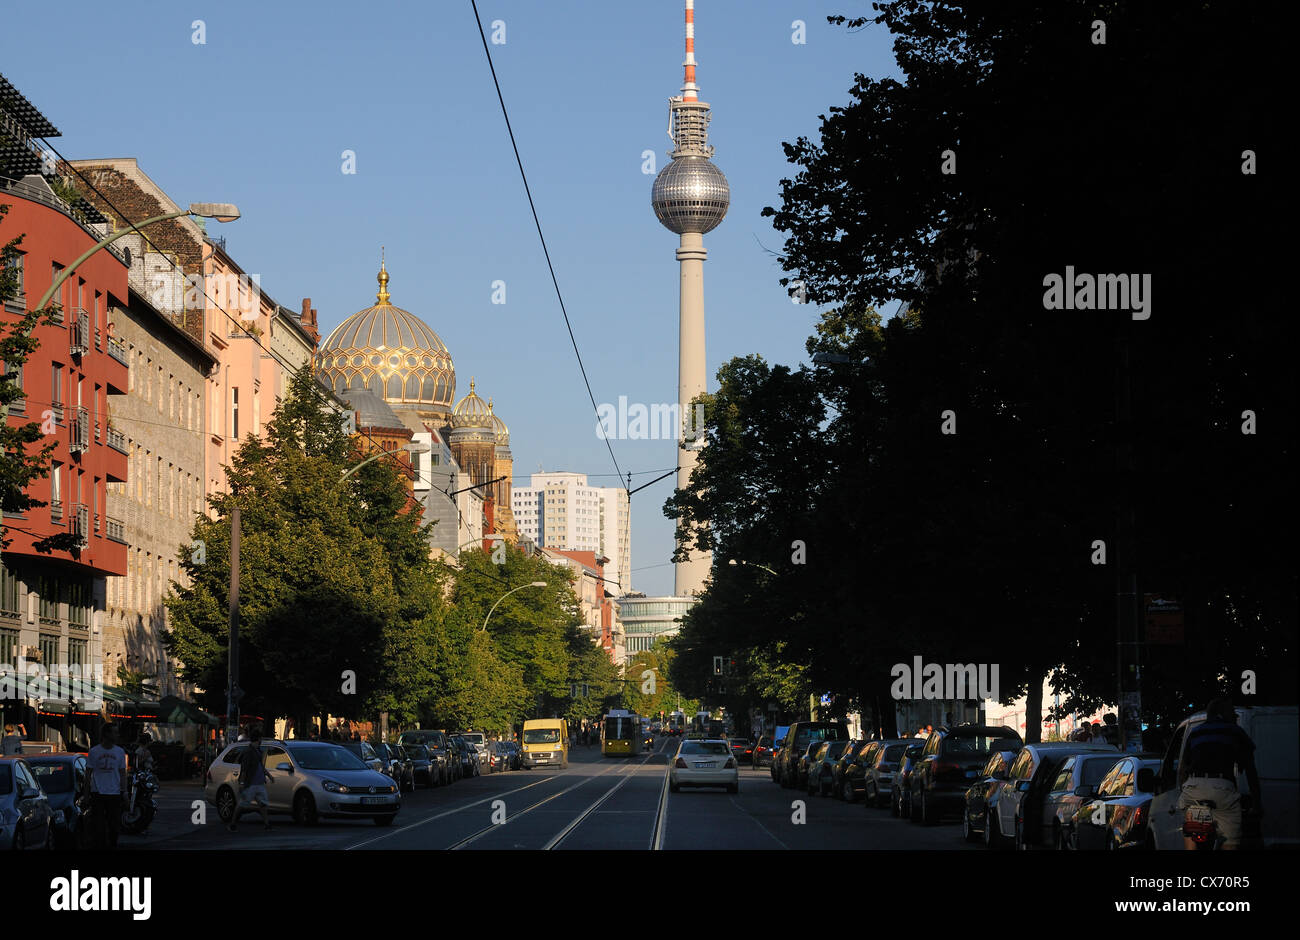 Oranienburger Strasse street with New Synagogue, Fernsehturm, television tower, Berlin Mitte, Berlin, Germany. Stock Photo